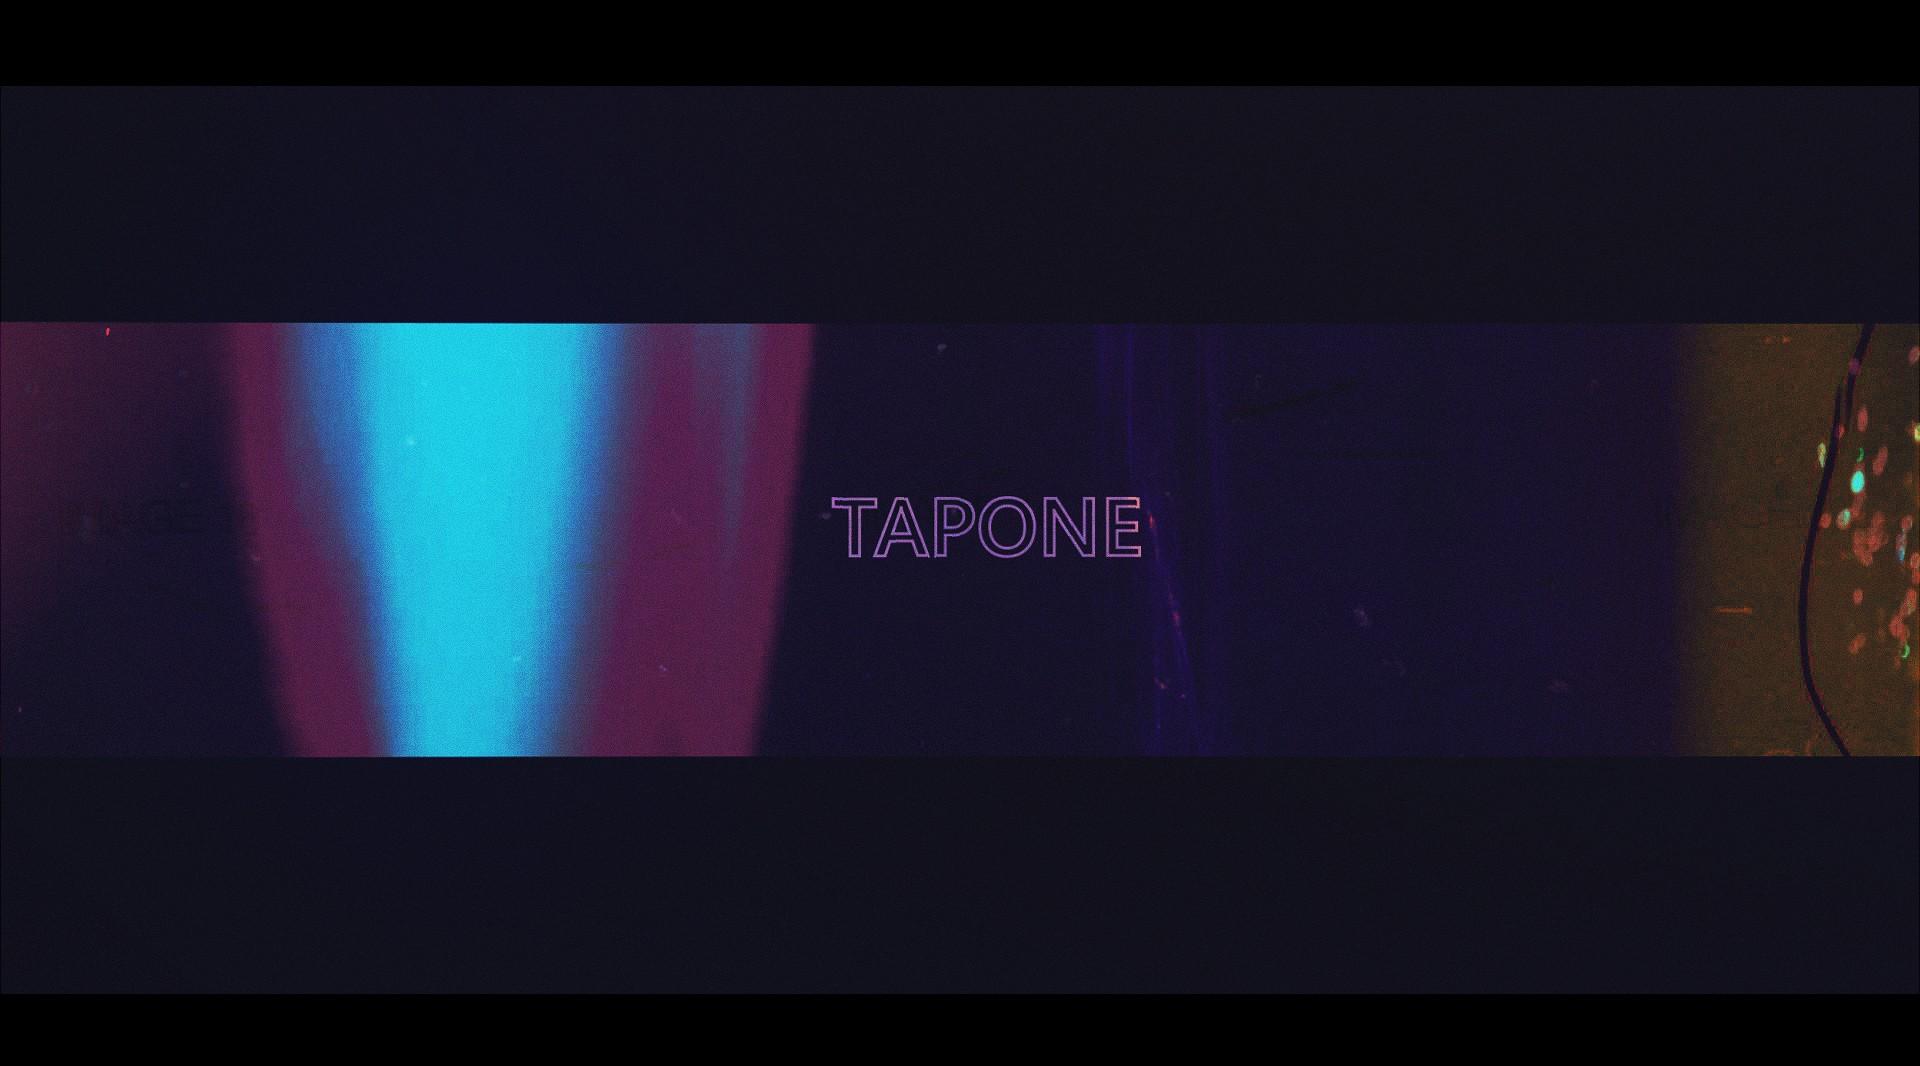 TAPONE CLUB